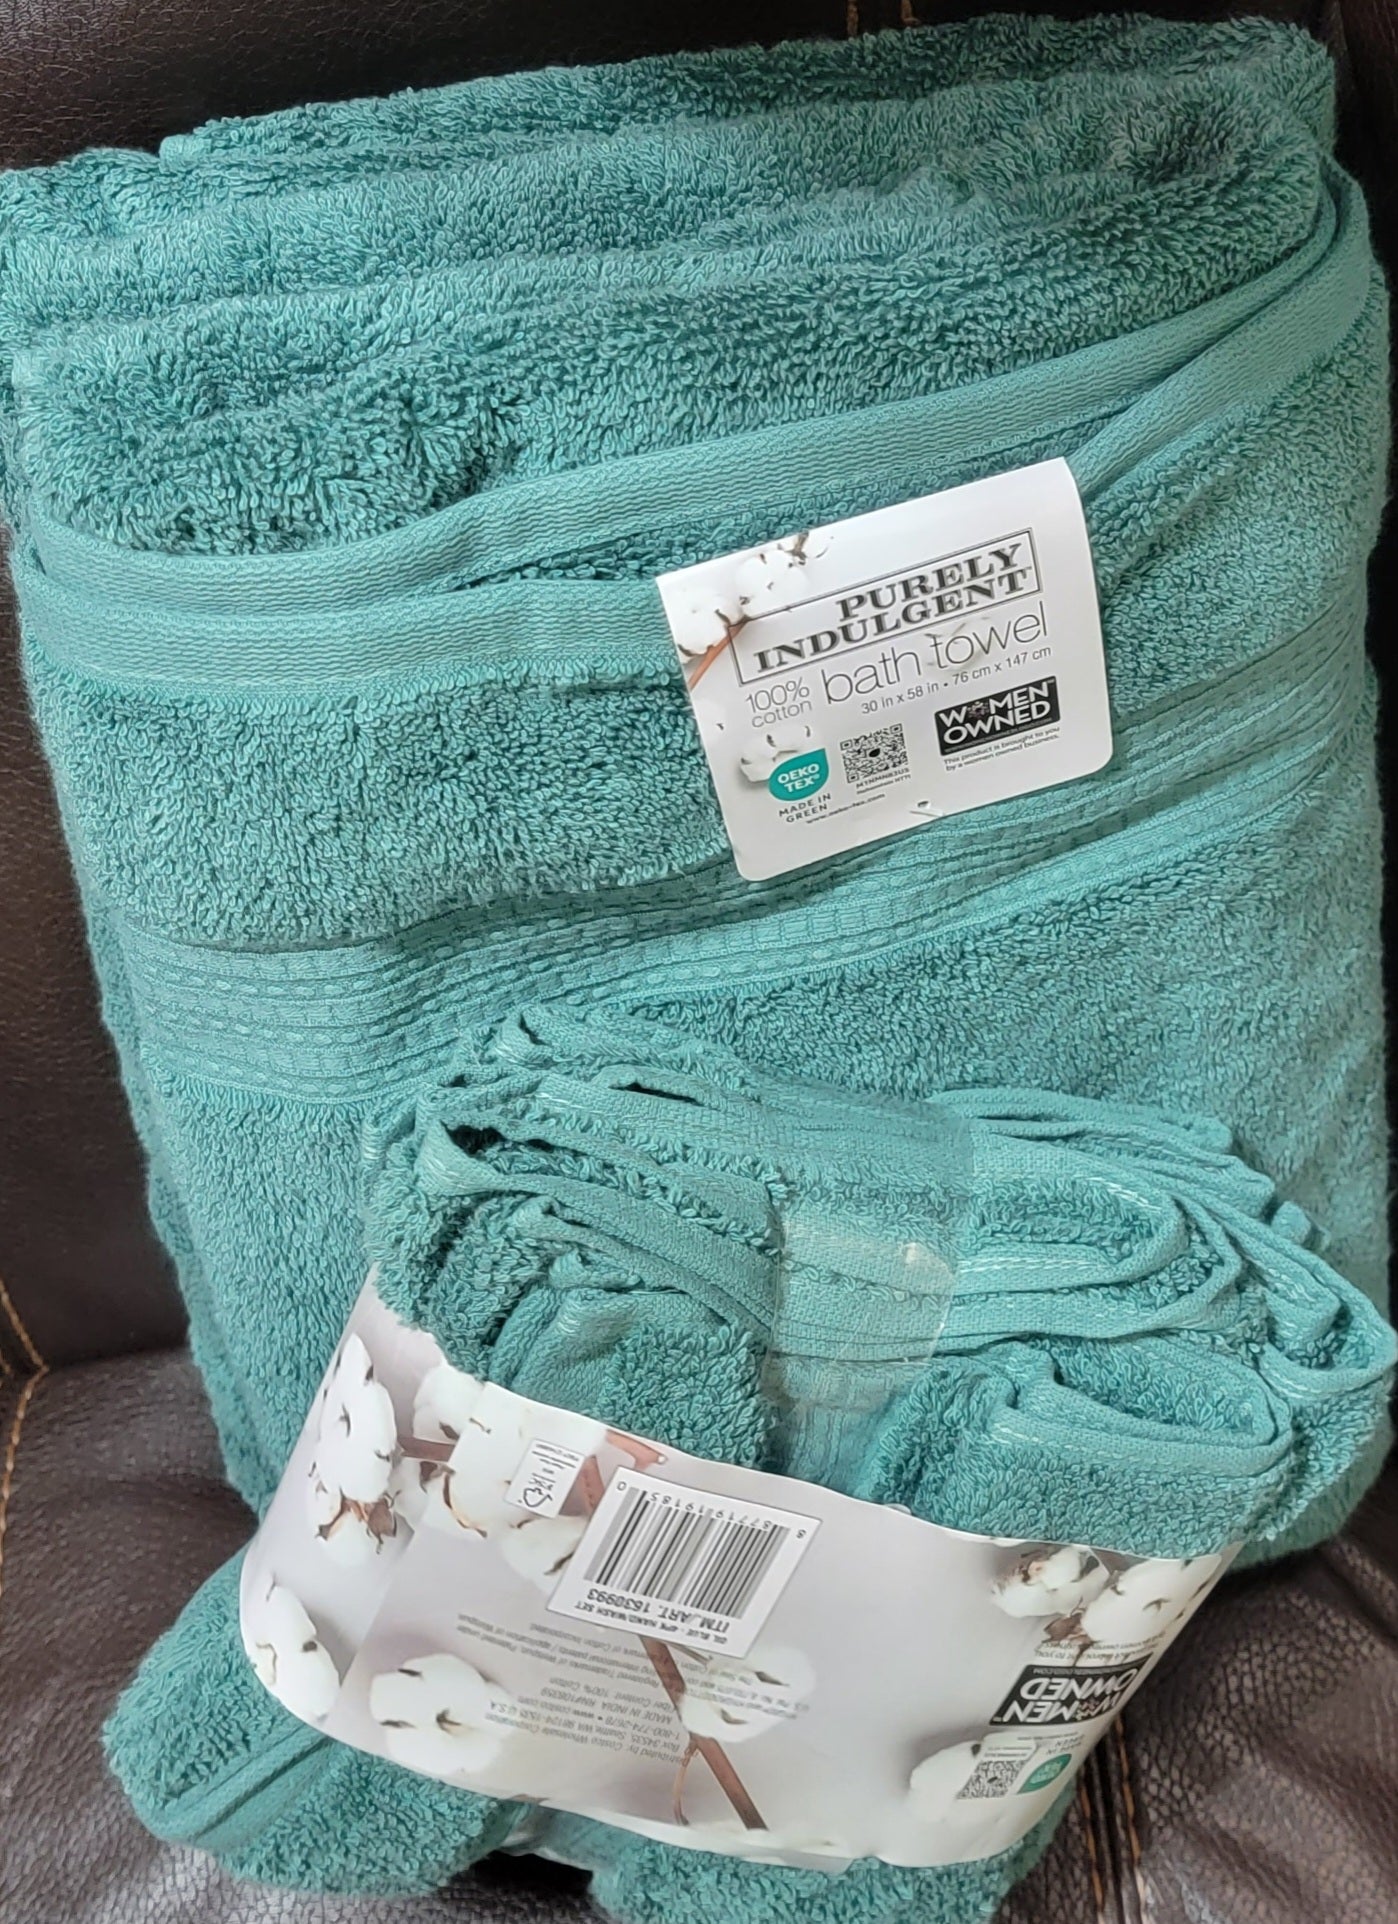 Purely Indulgent 4 Piece Cotton Hand Towel and Wash Cloth Set Blue